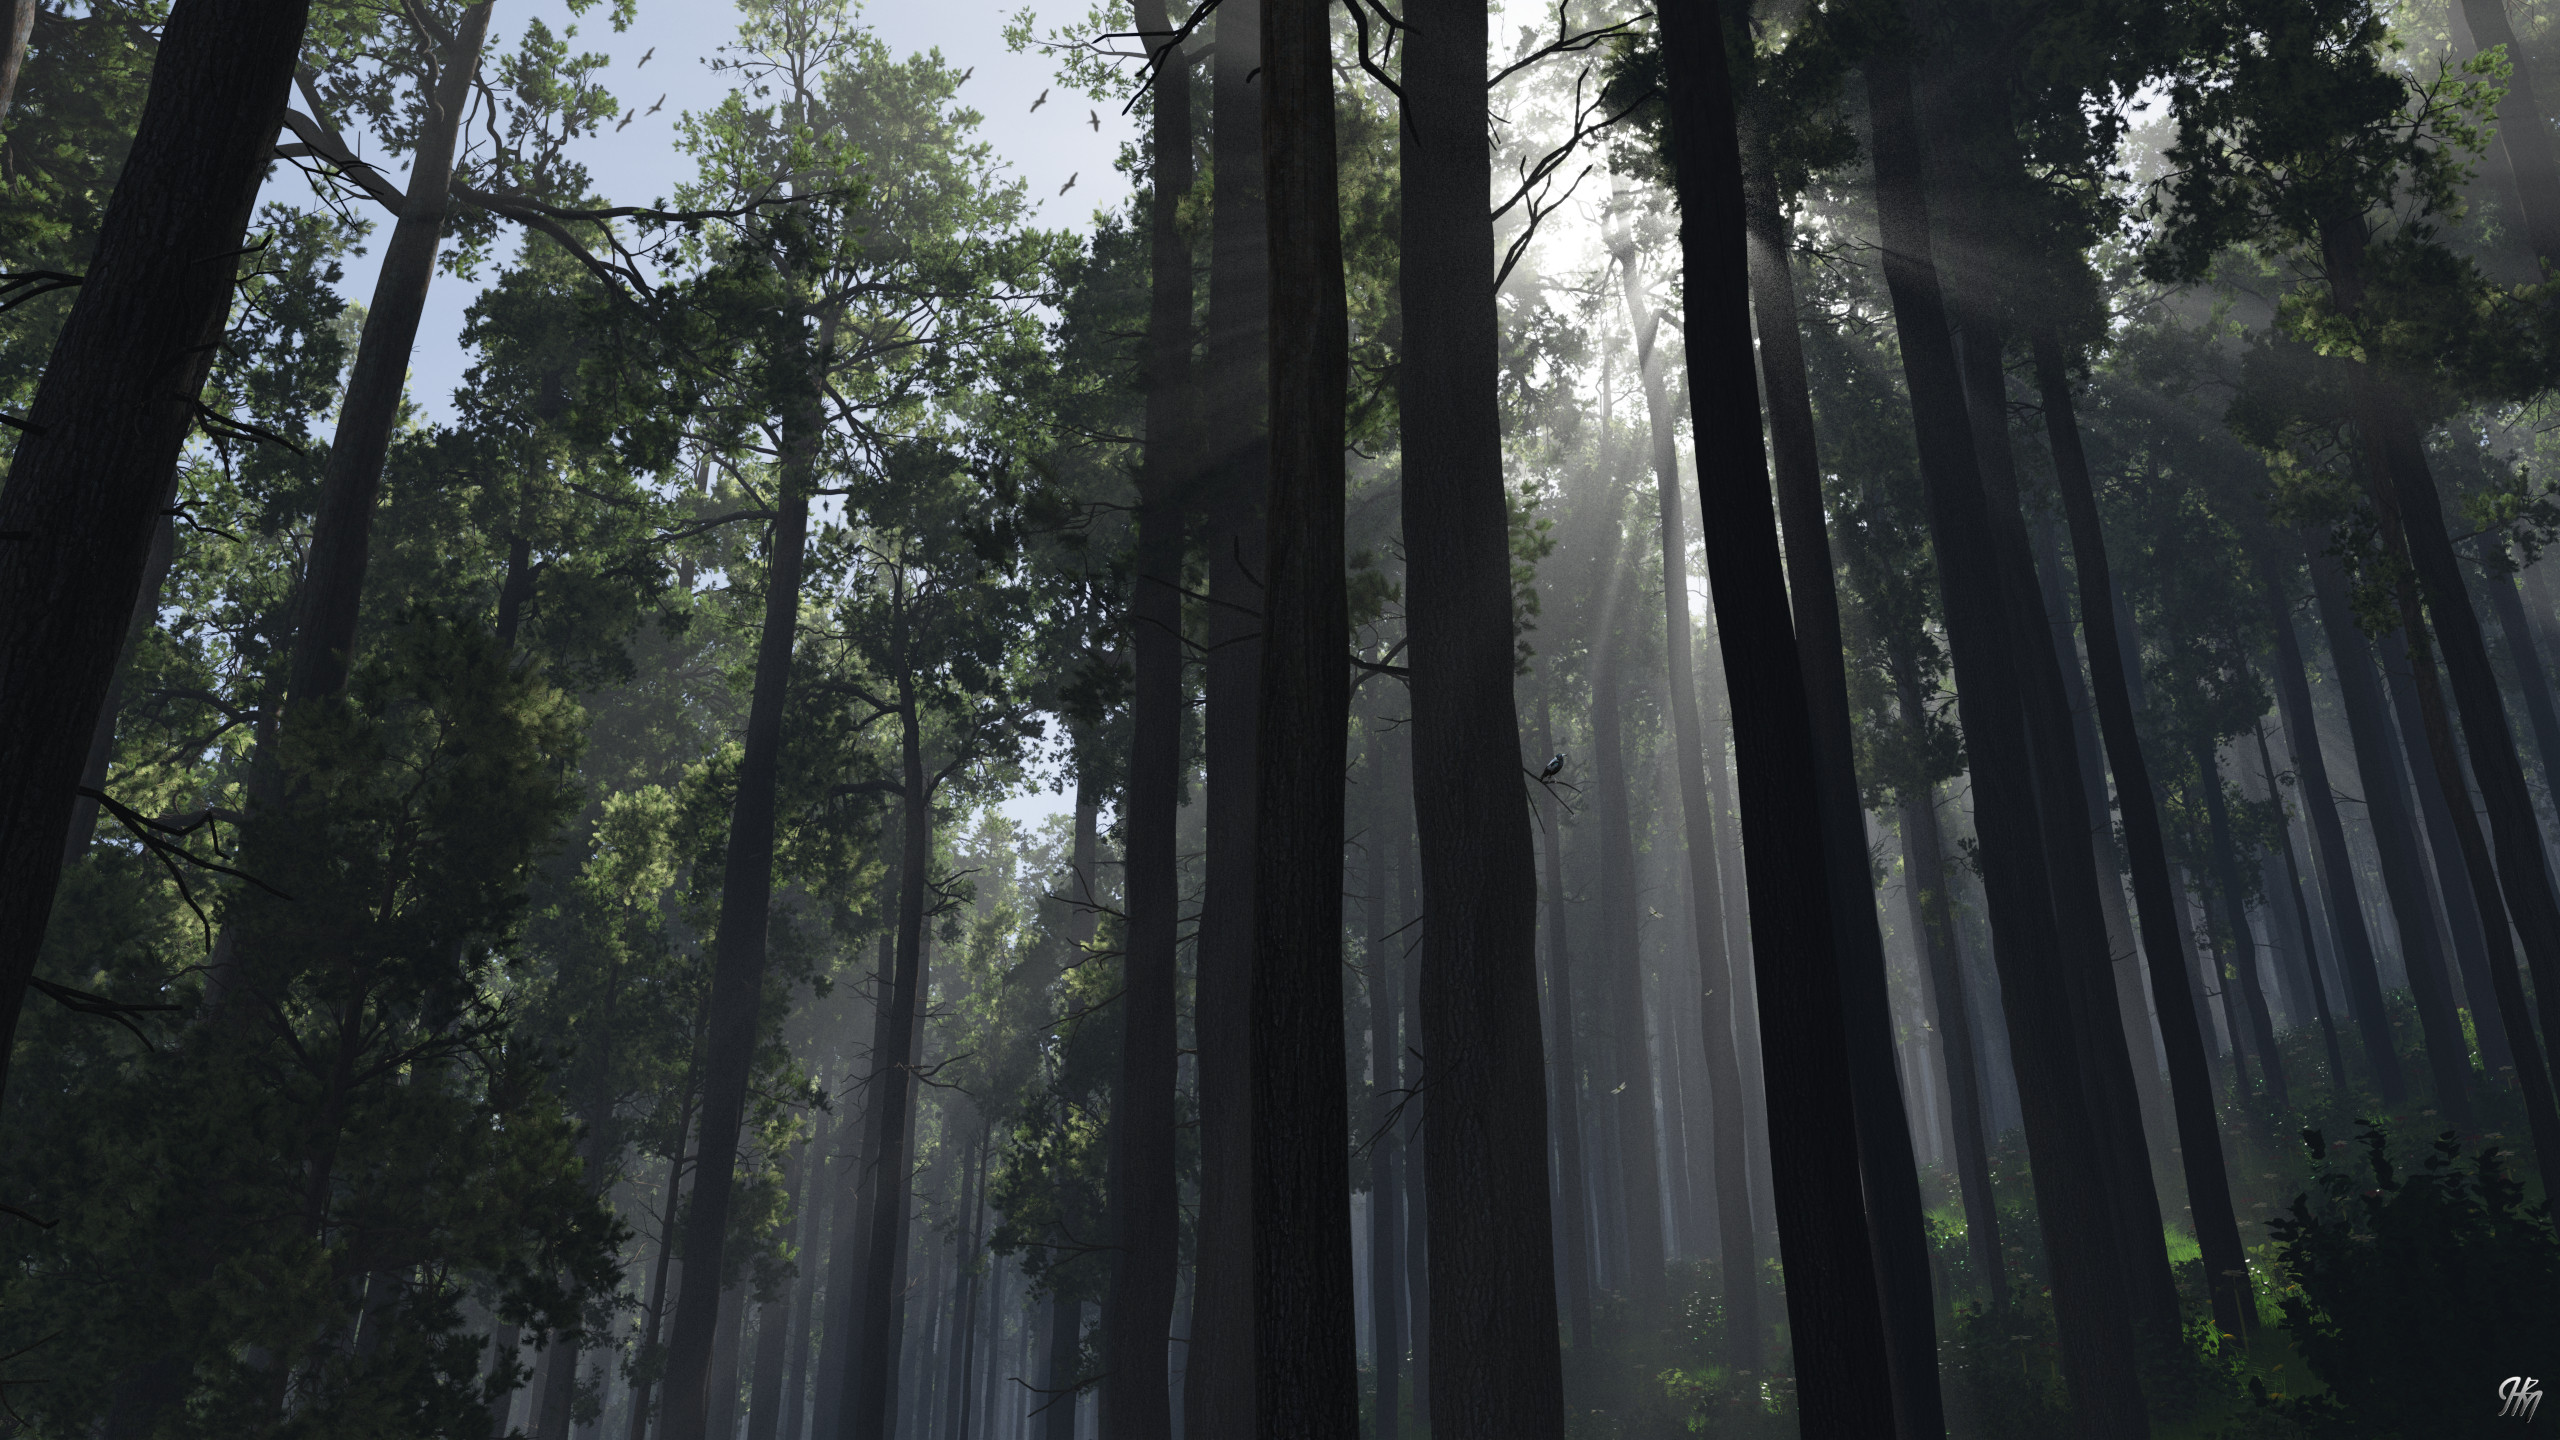 Forest Morning
20190921TG